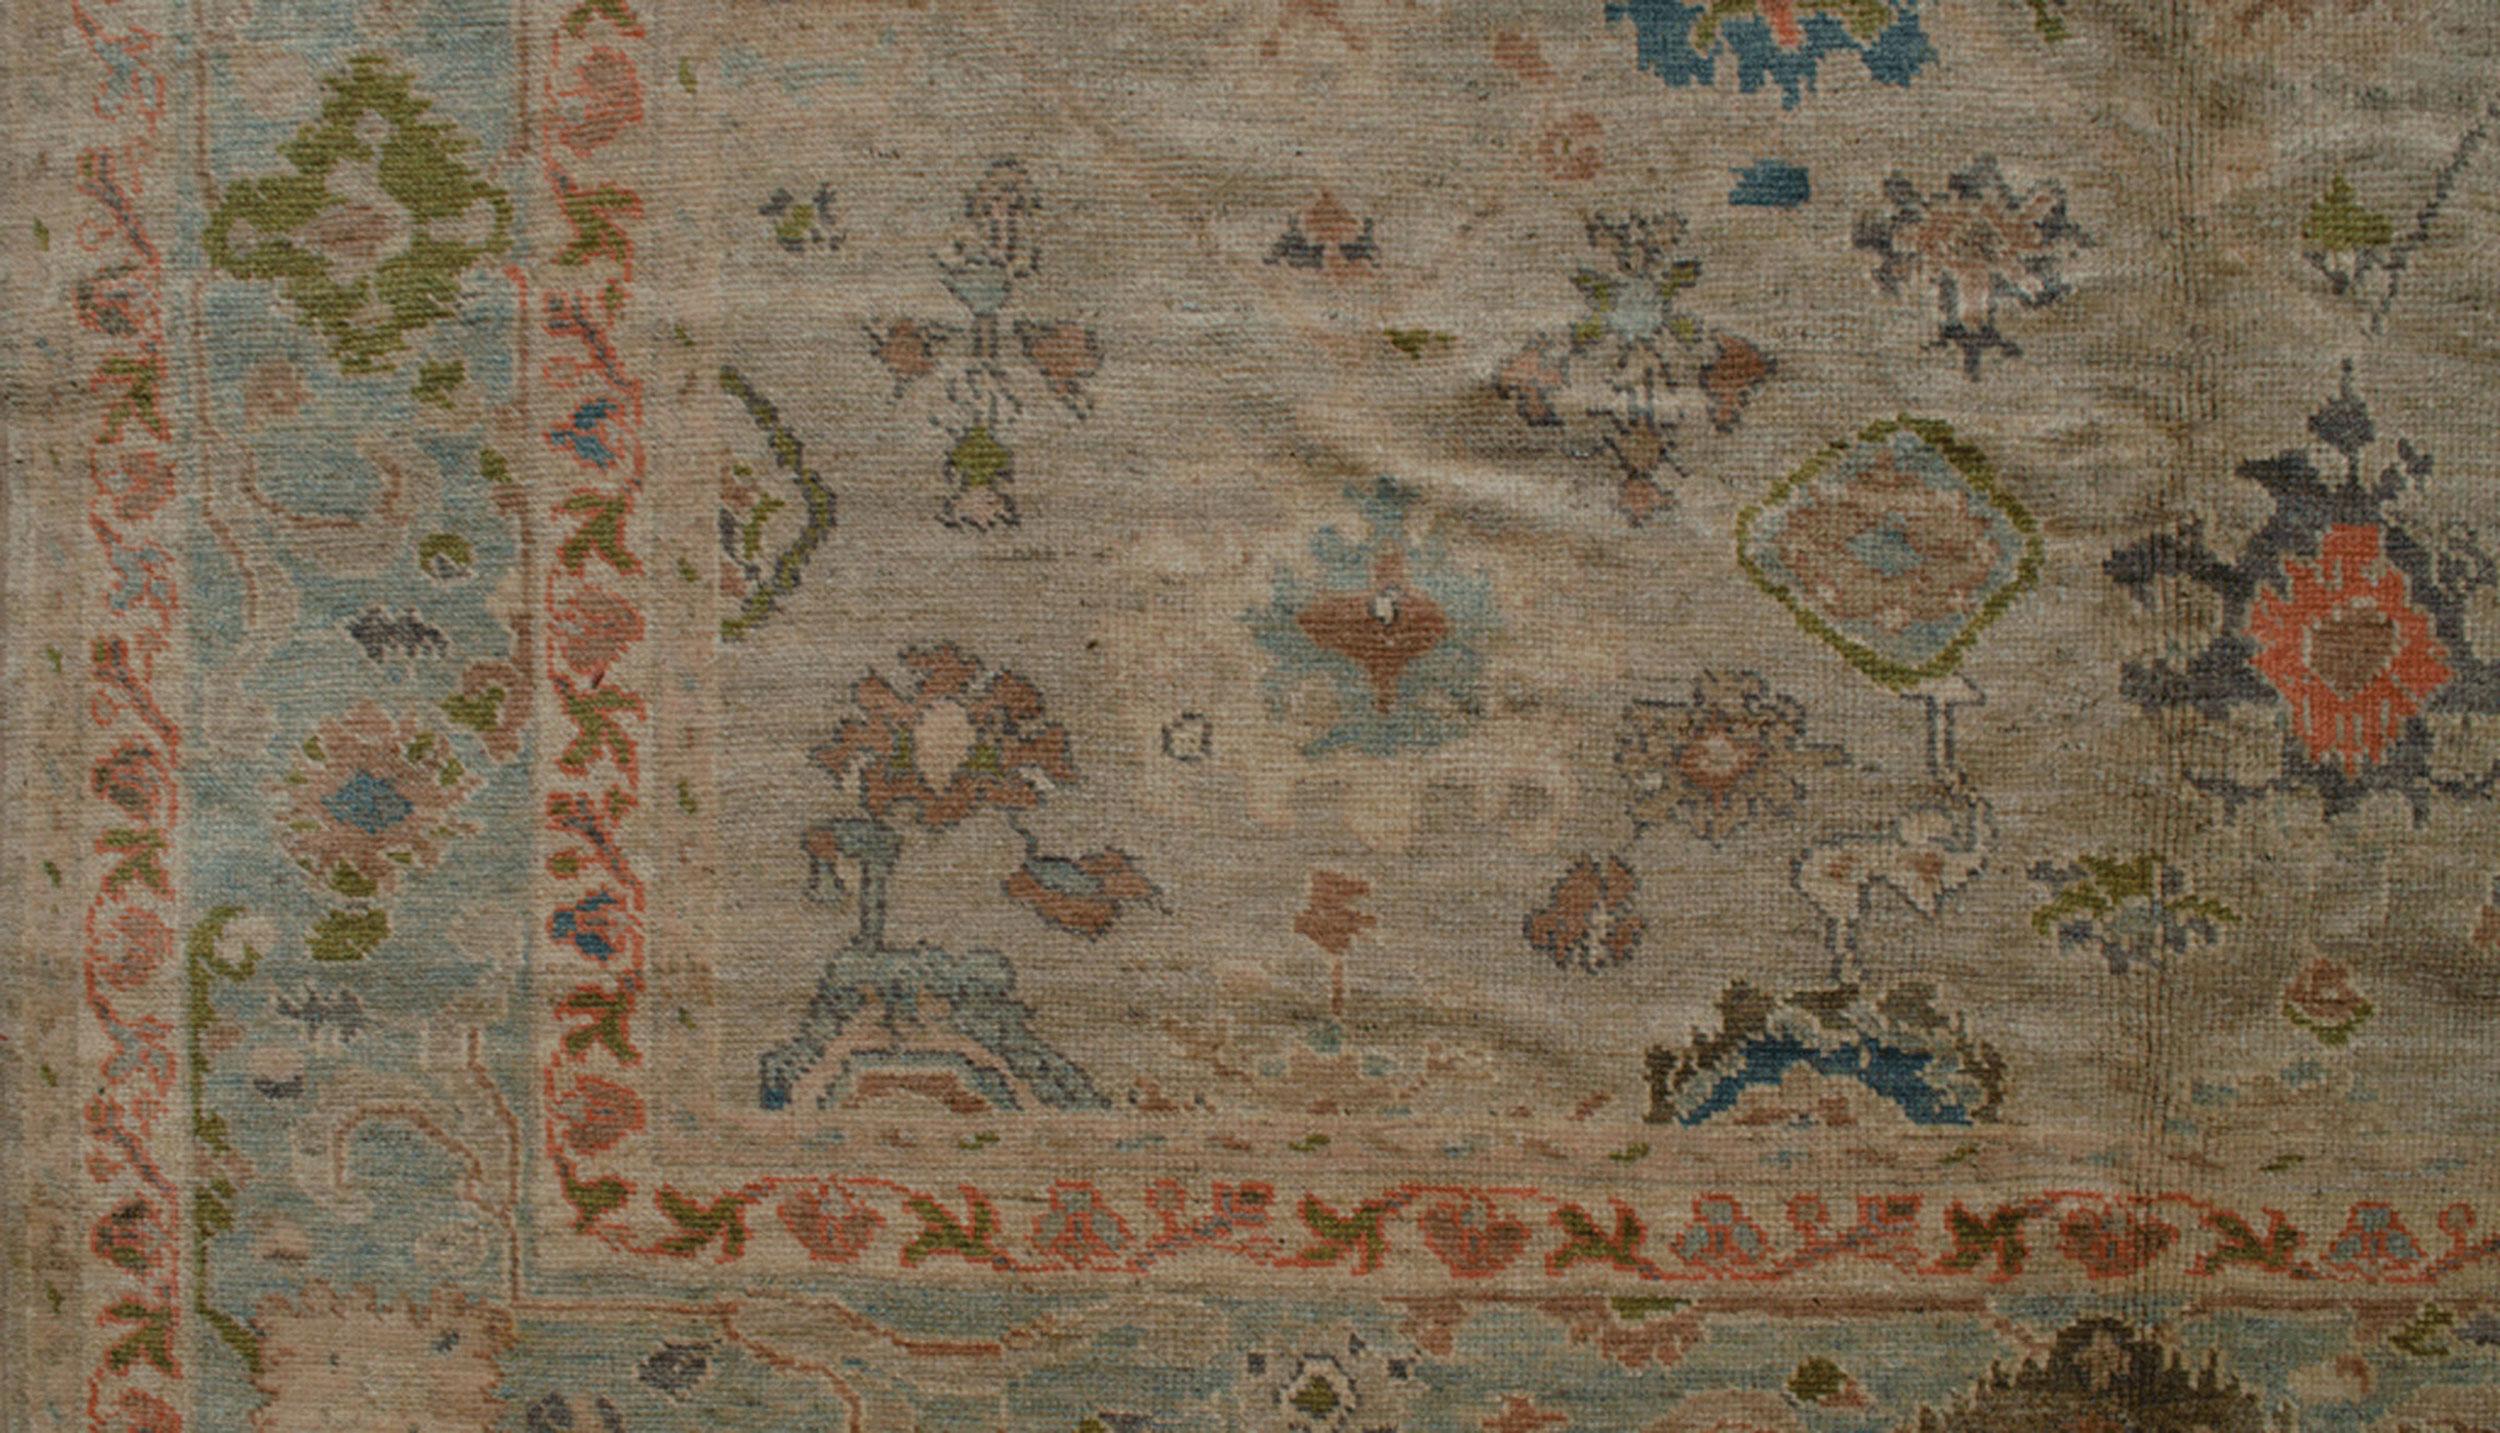 Ushak Carpet, West Anatolia, 412x300cm In New Condition For Sale In Henley-on-Thames, Oxfordshire